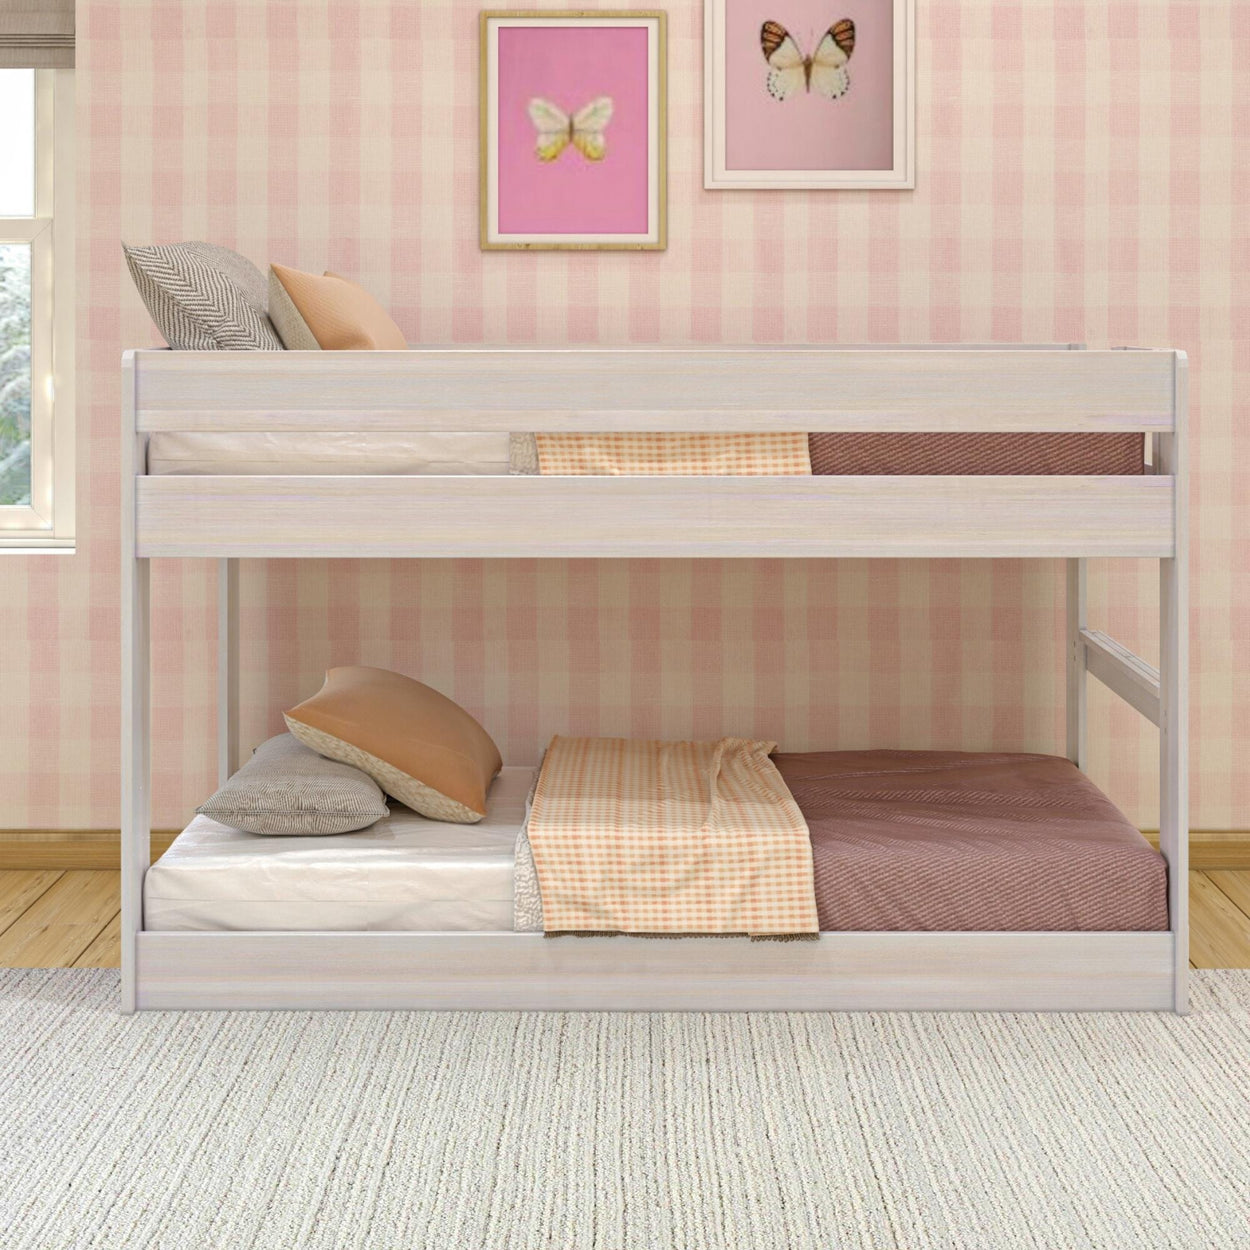 190214-182 : Bunk Beds Farmhouse Twin over Twin Low Bunk Bed, White Wash